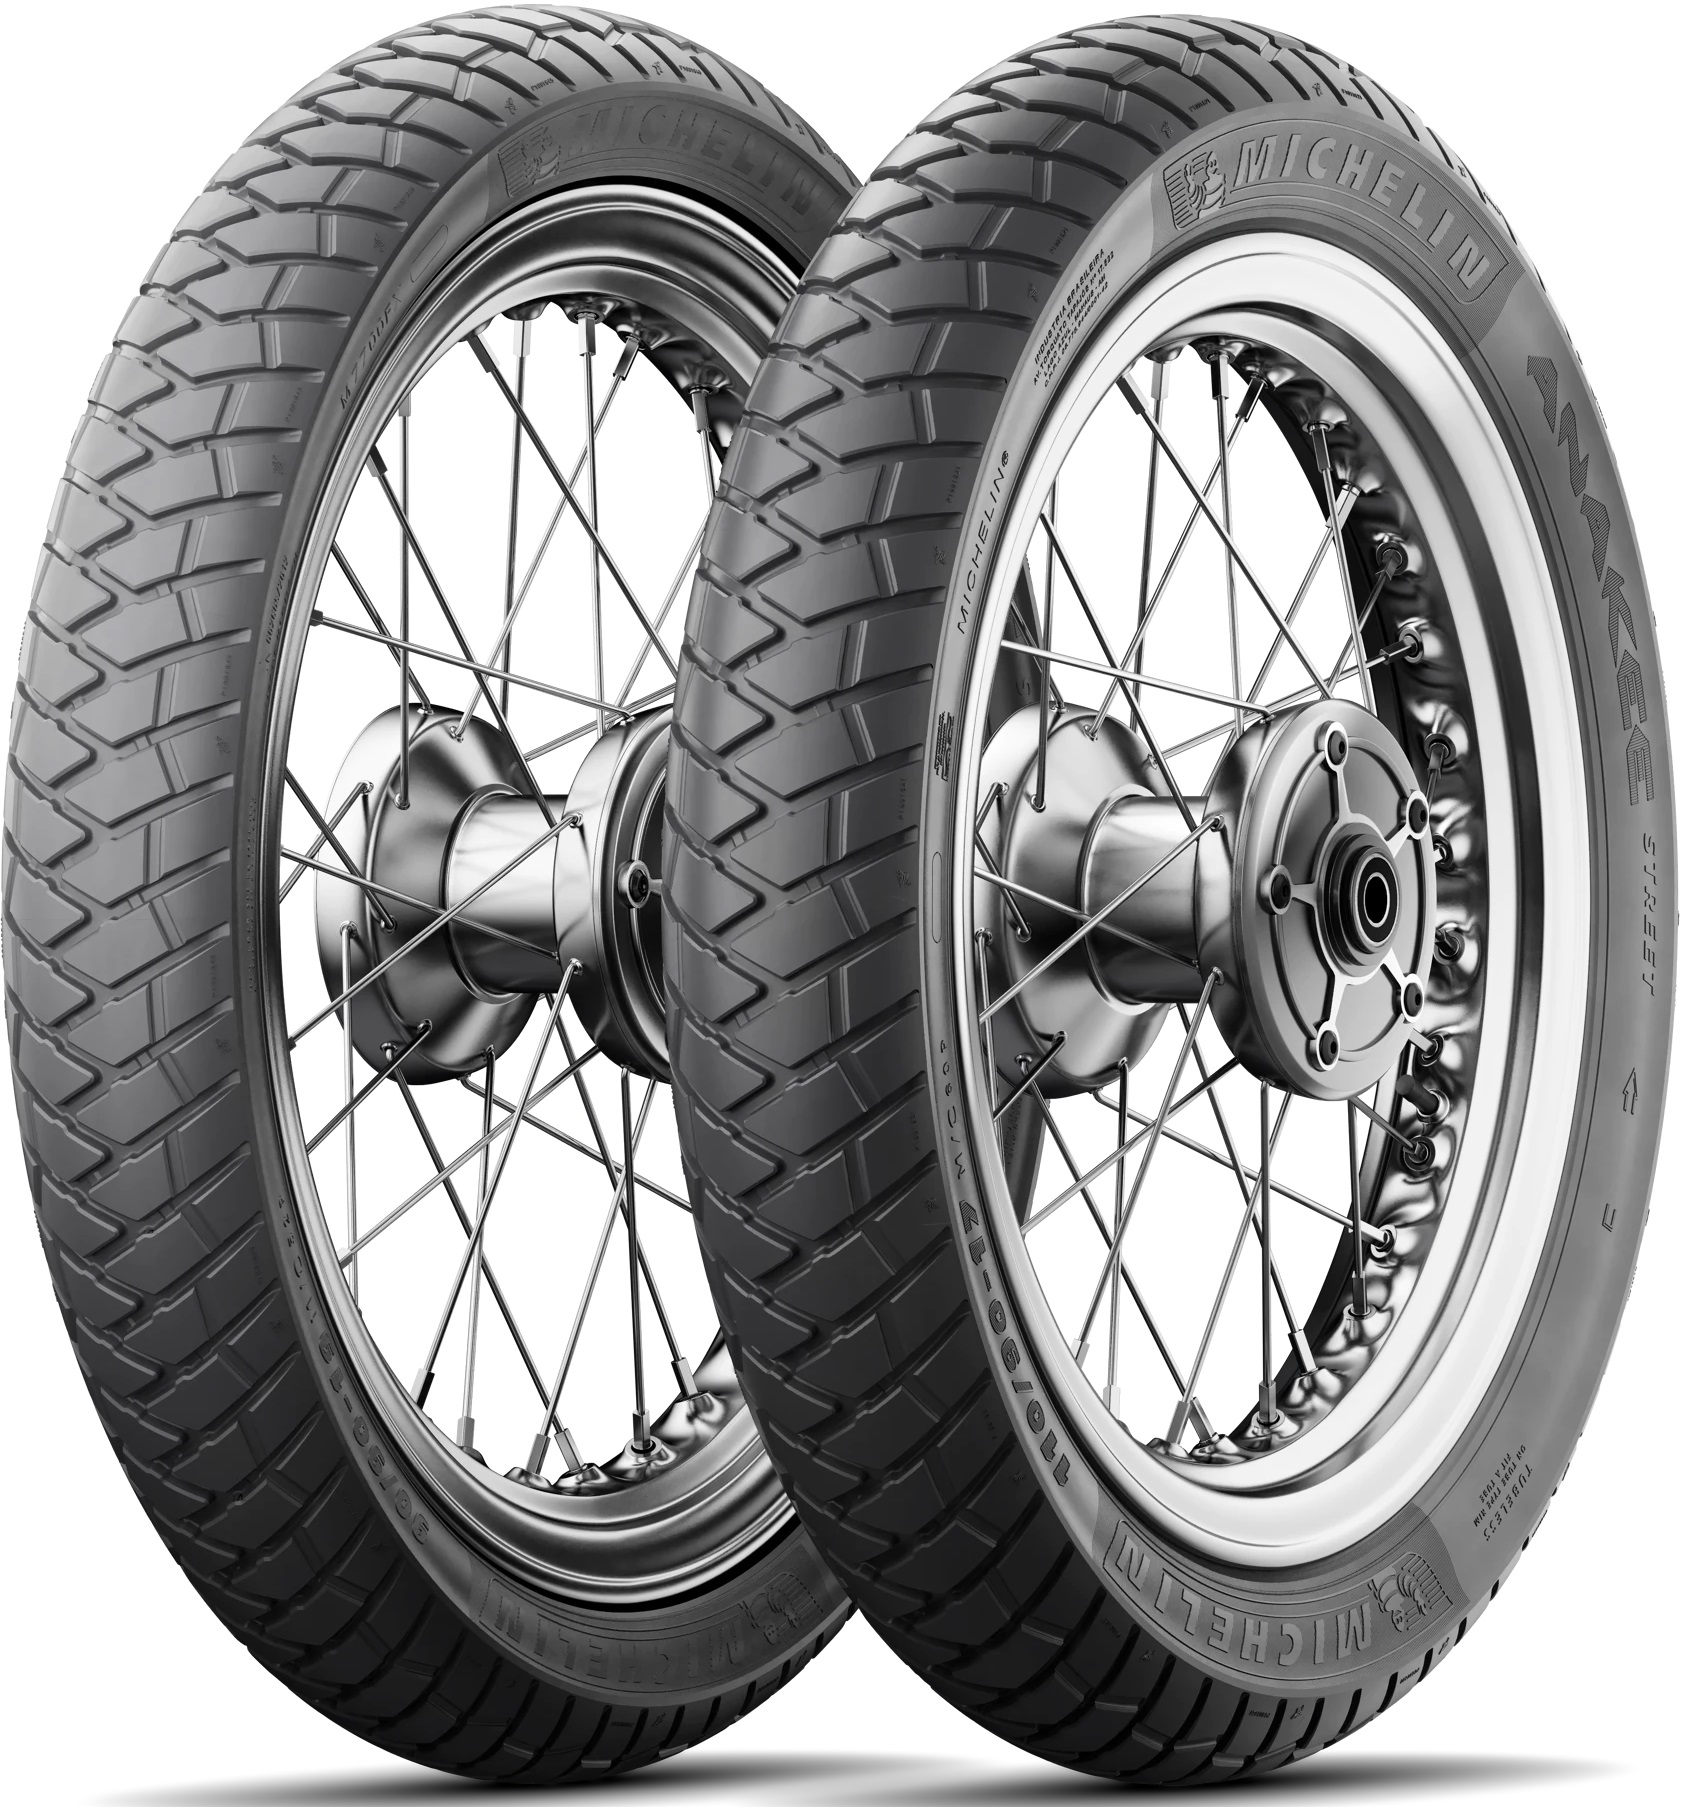 MICHELIN ANAKEE STREET 120/90 R 17 64T